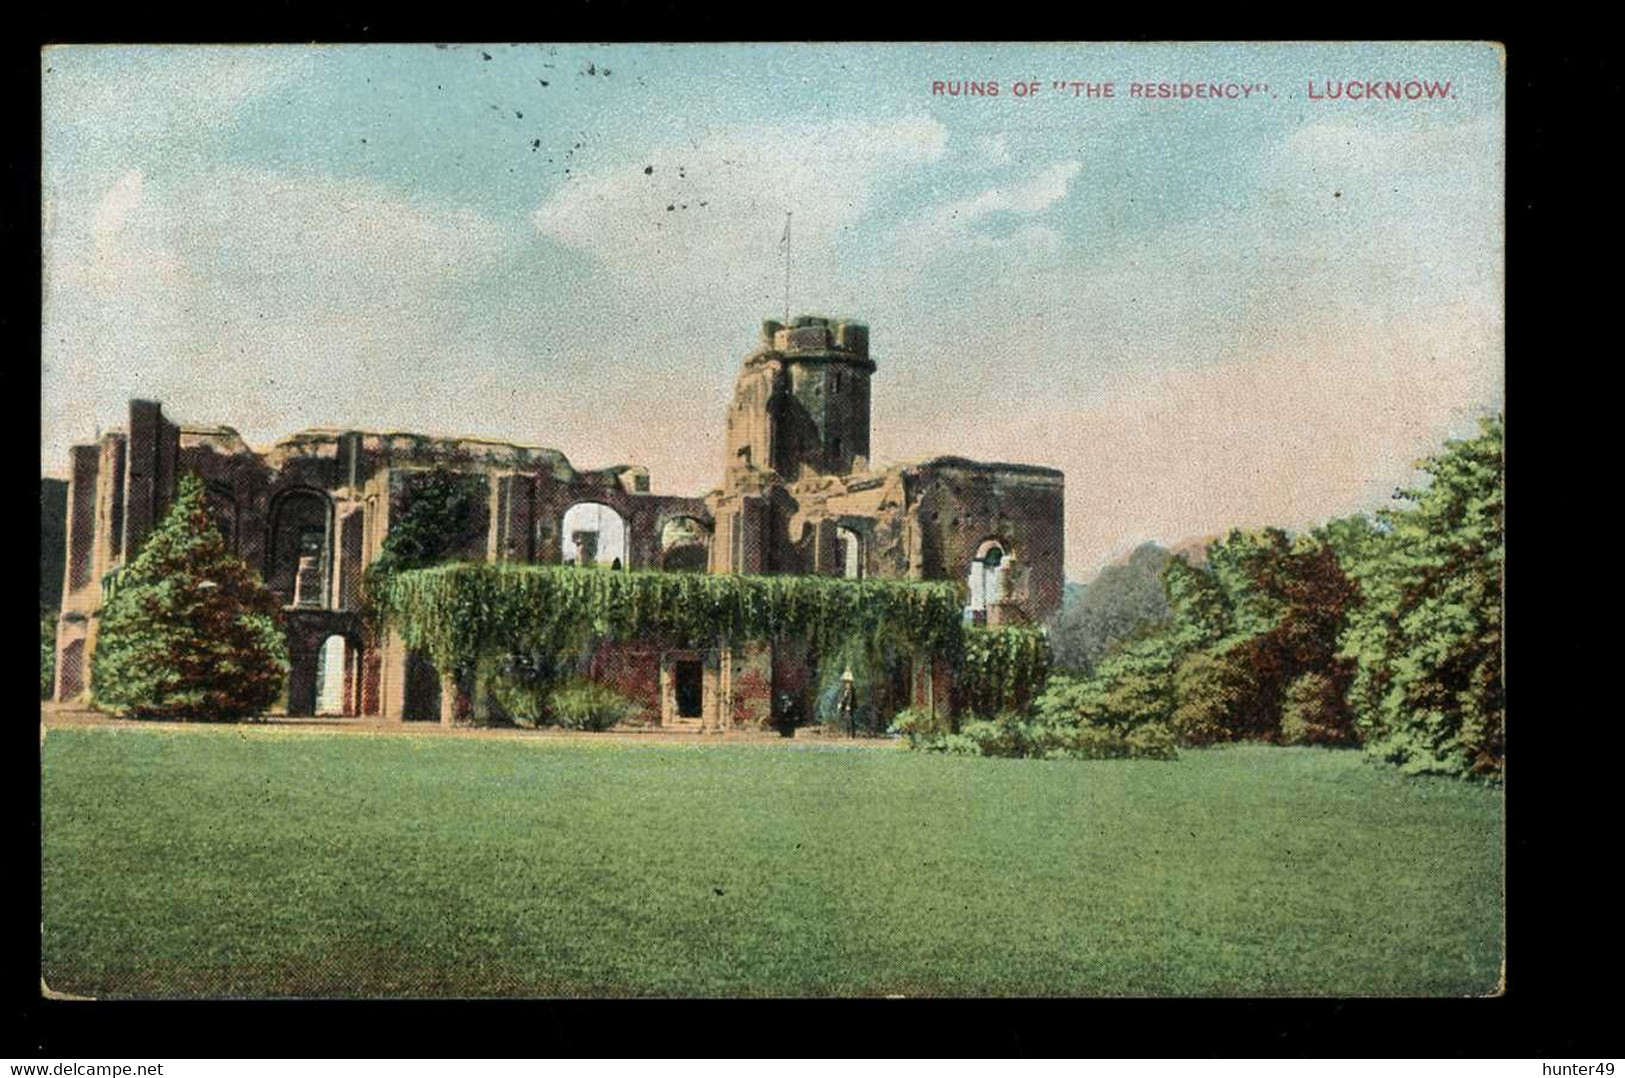 Lucknow Ruins Of The Residency 1908 - Angus